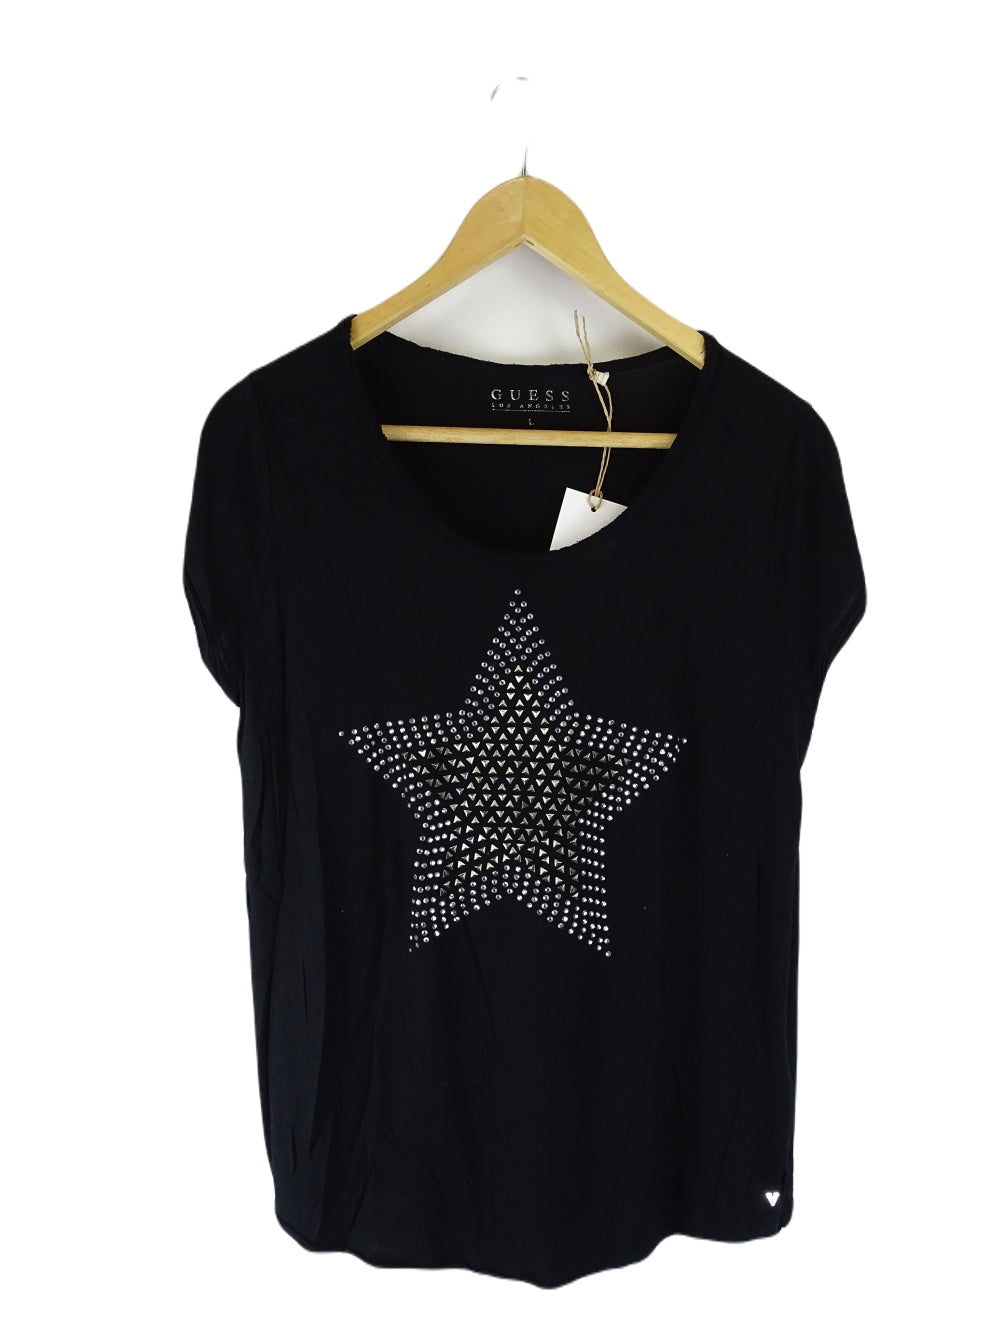 Guess Black And Silver Star T-shirt L